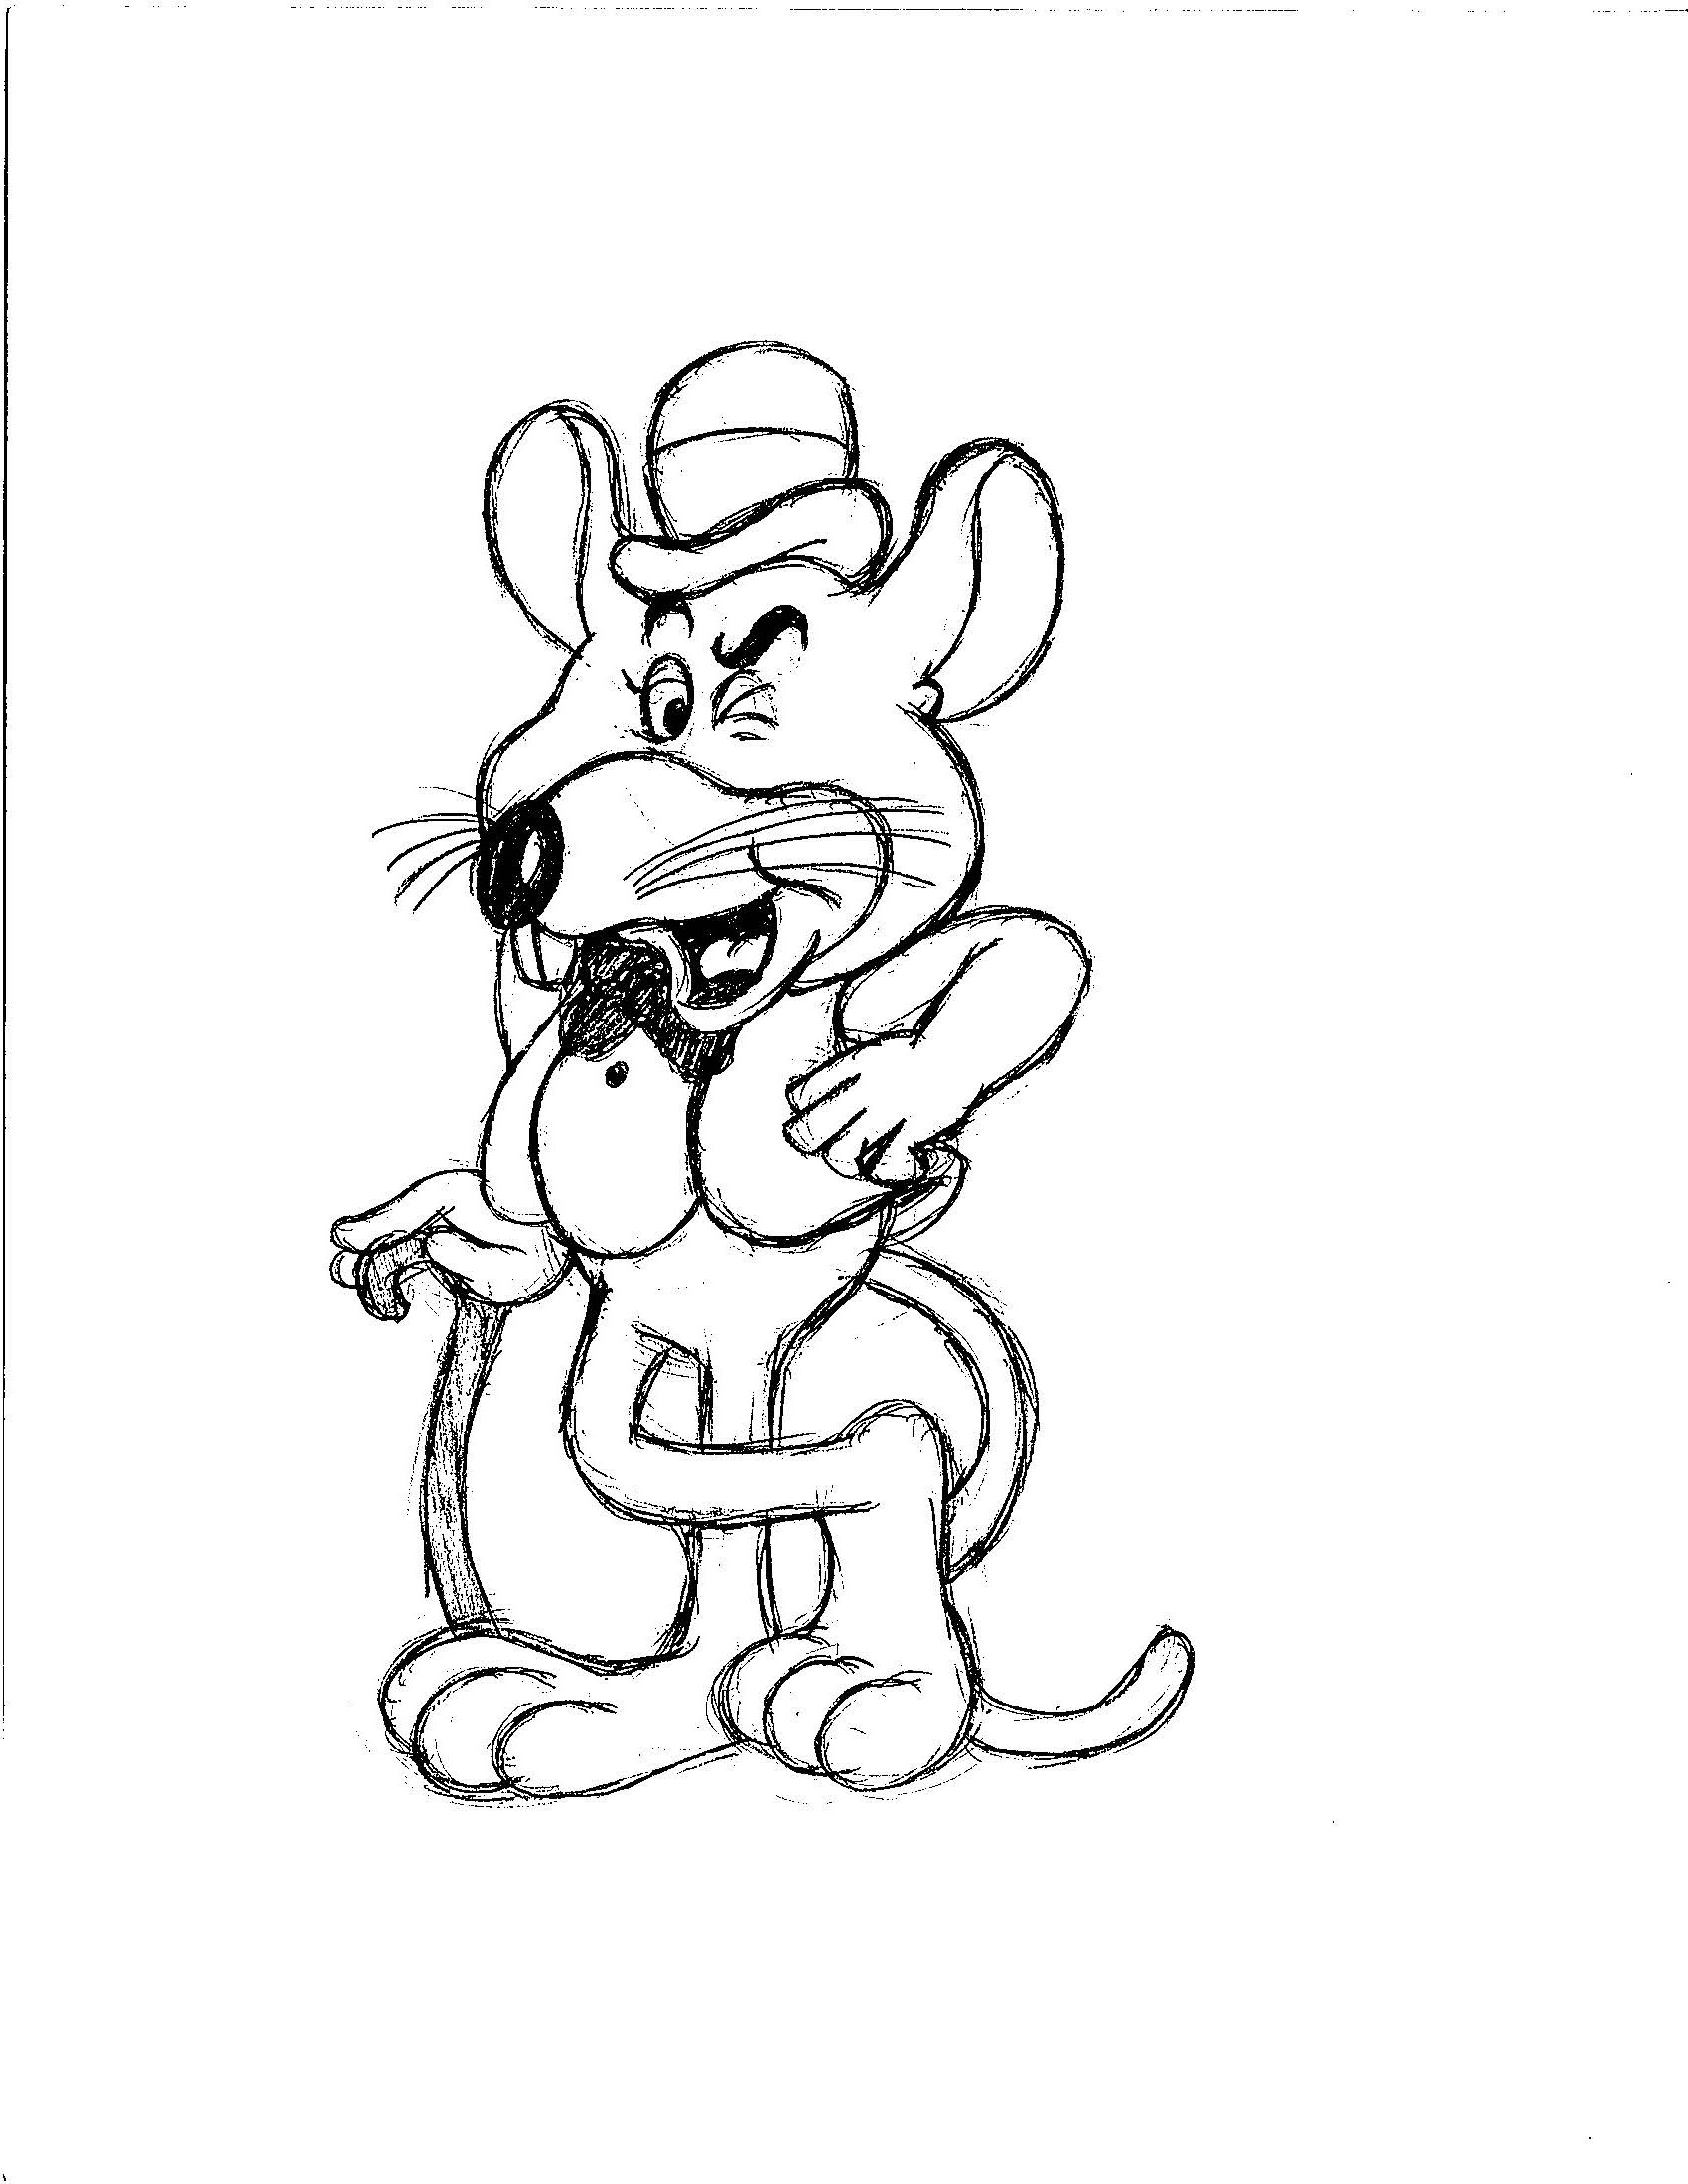 Chuck E Cheese Coloring Page at GetColorings.com | Free printable colorings pages to print and color